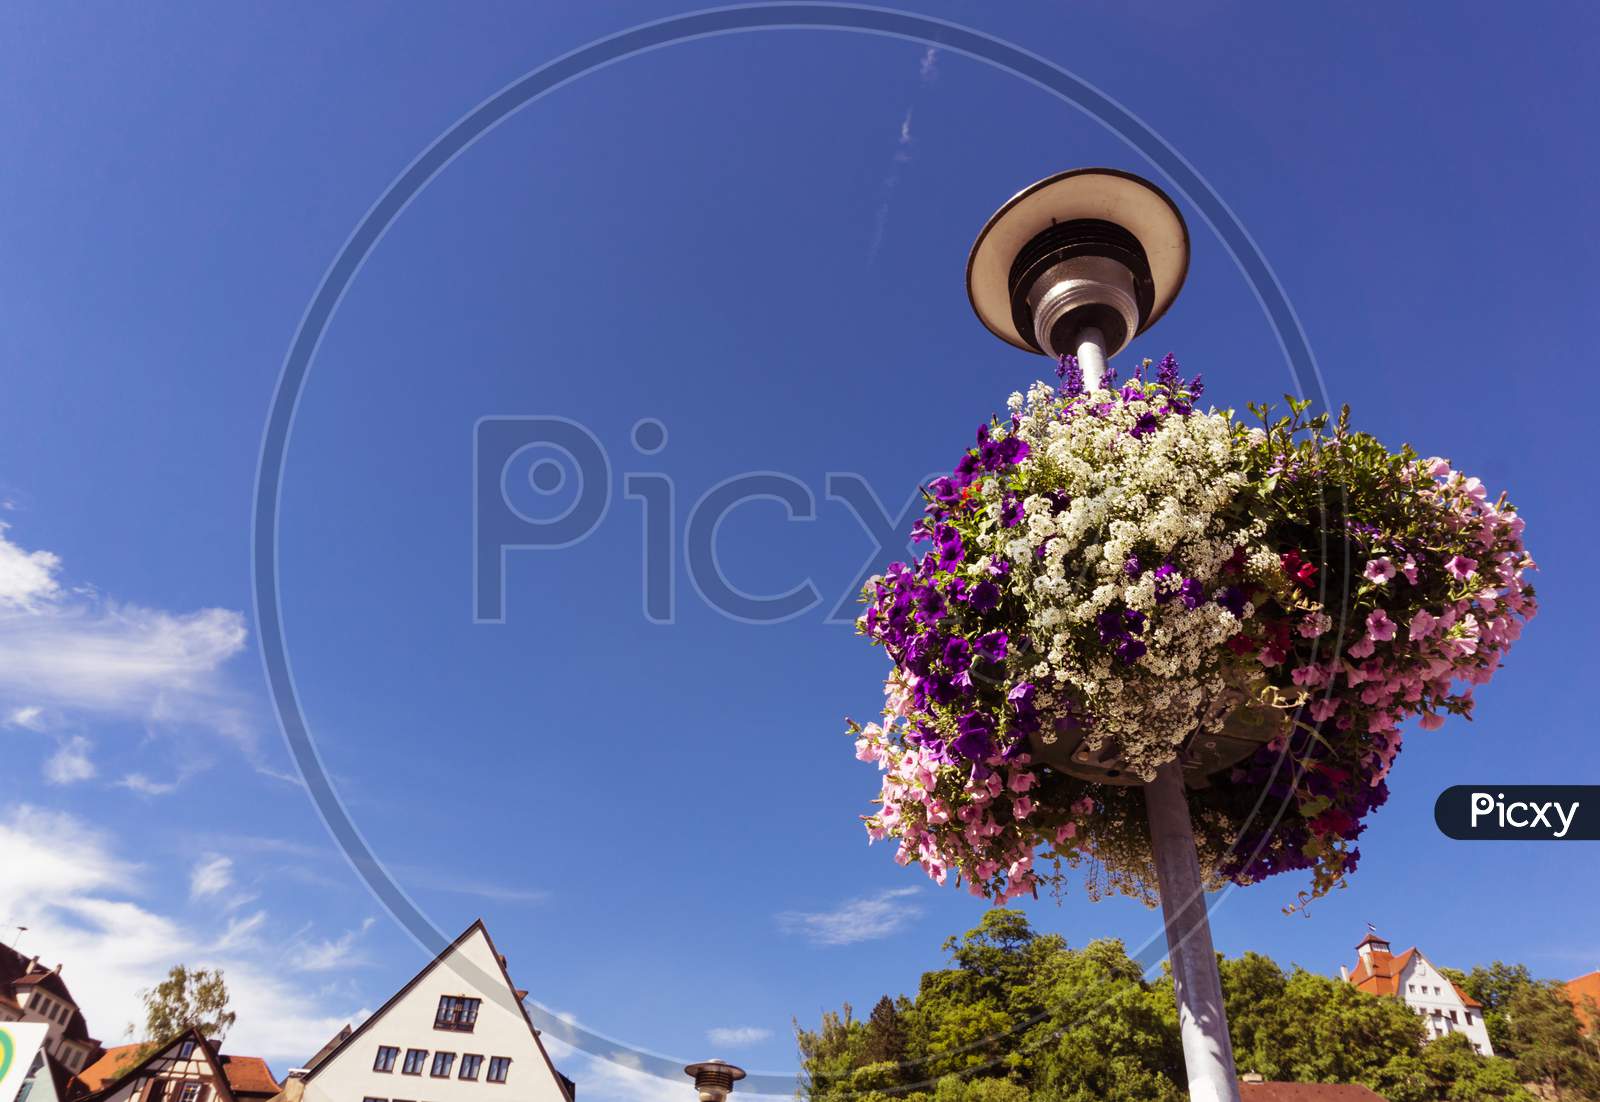 A Bunch Of Colorful Flowers On A Lamp Post